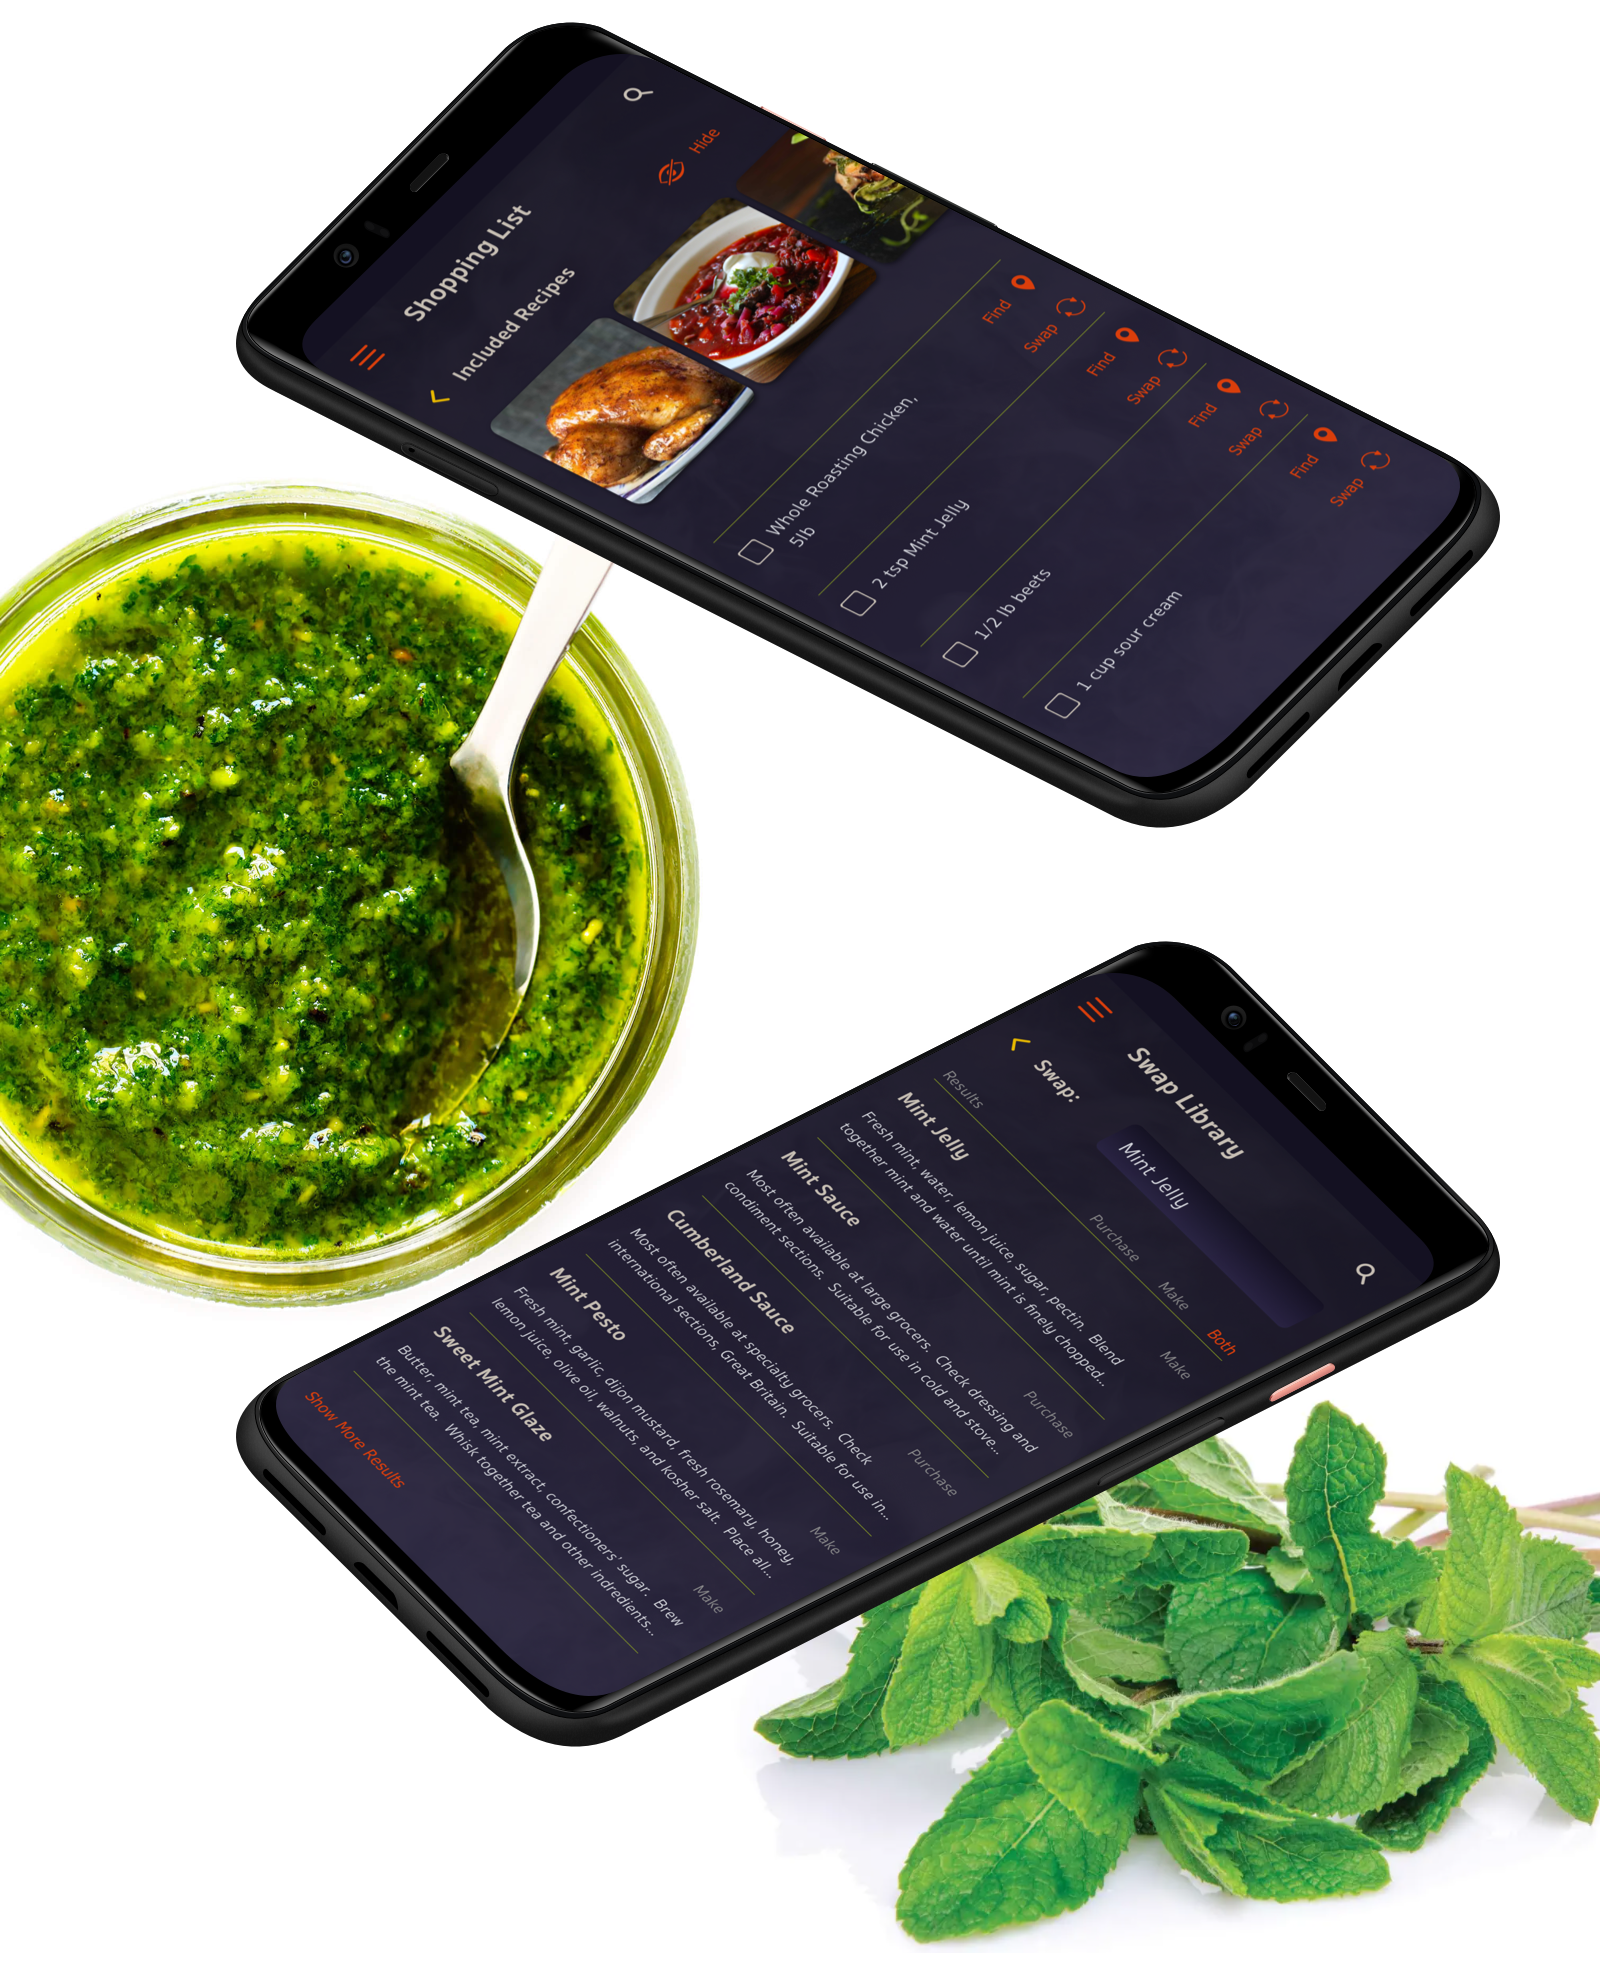 3 phones showing recipes and recipe comparison page